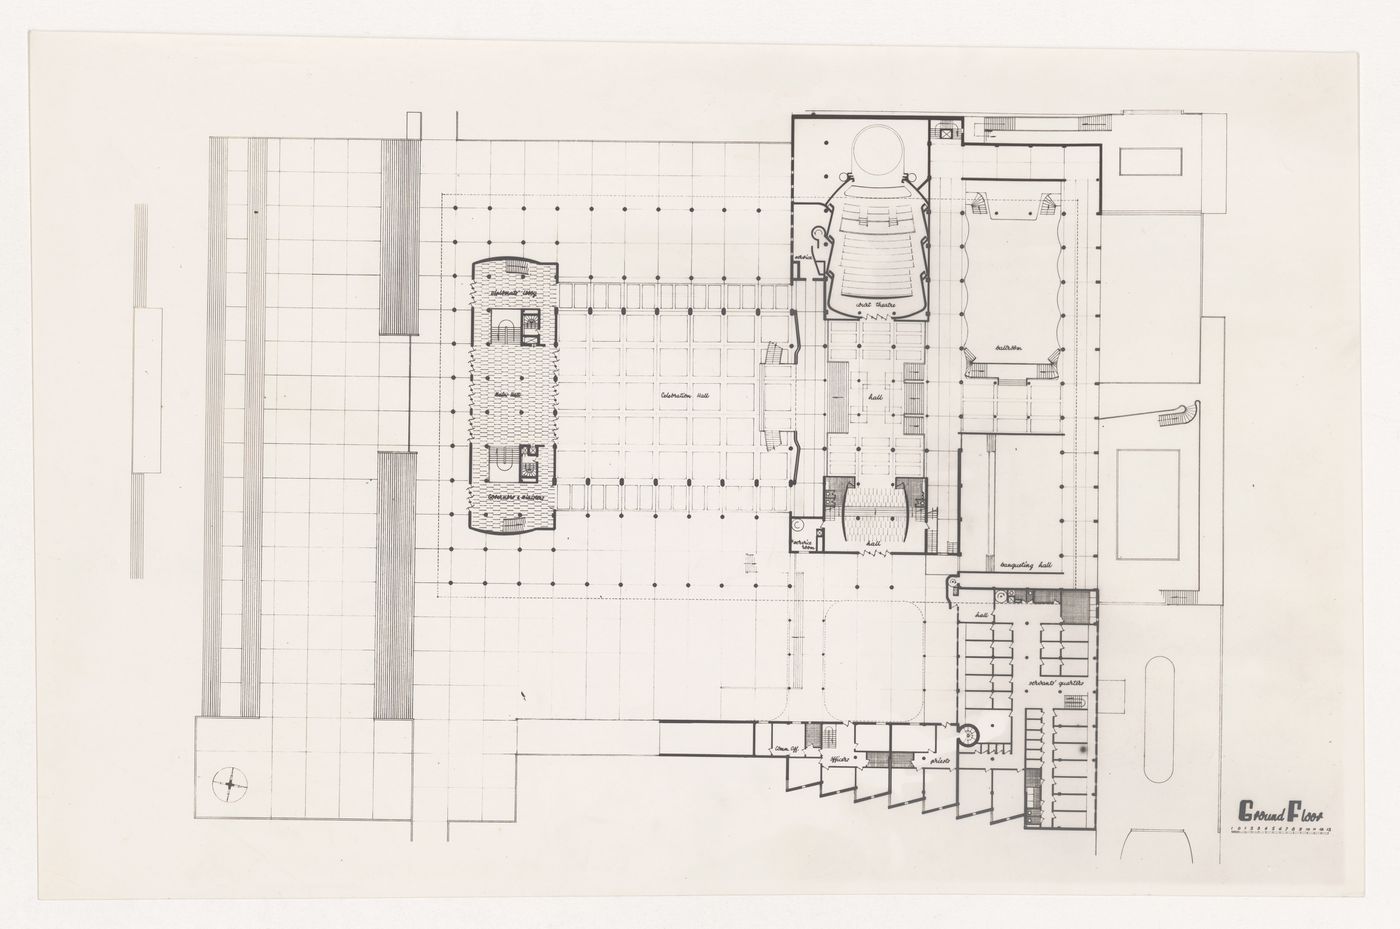 Ground floor plan for Government House, Addis Ababa, Ethiopia